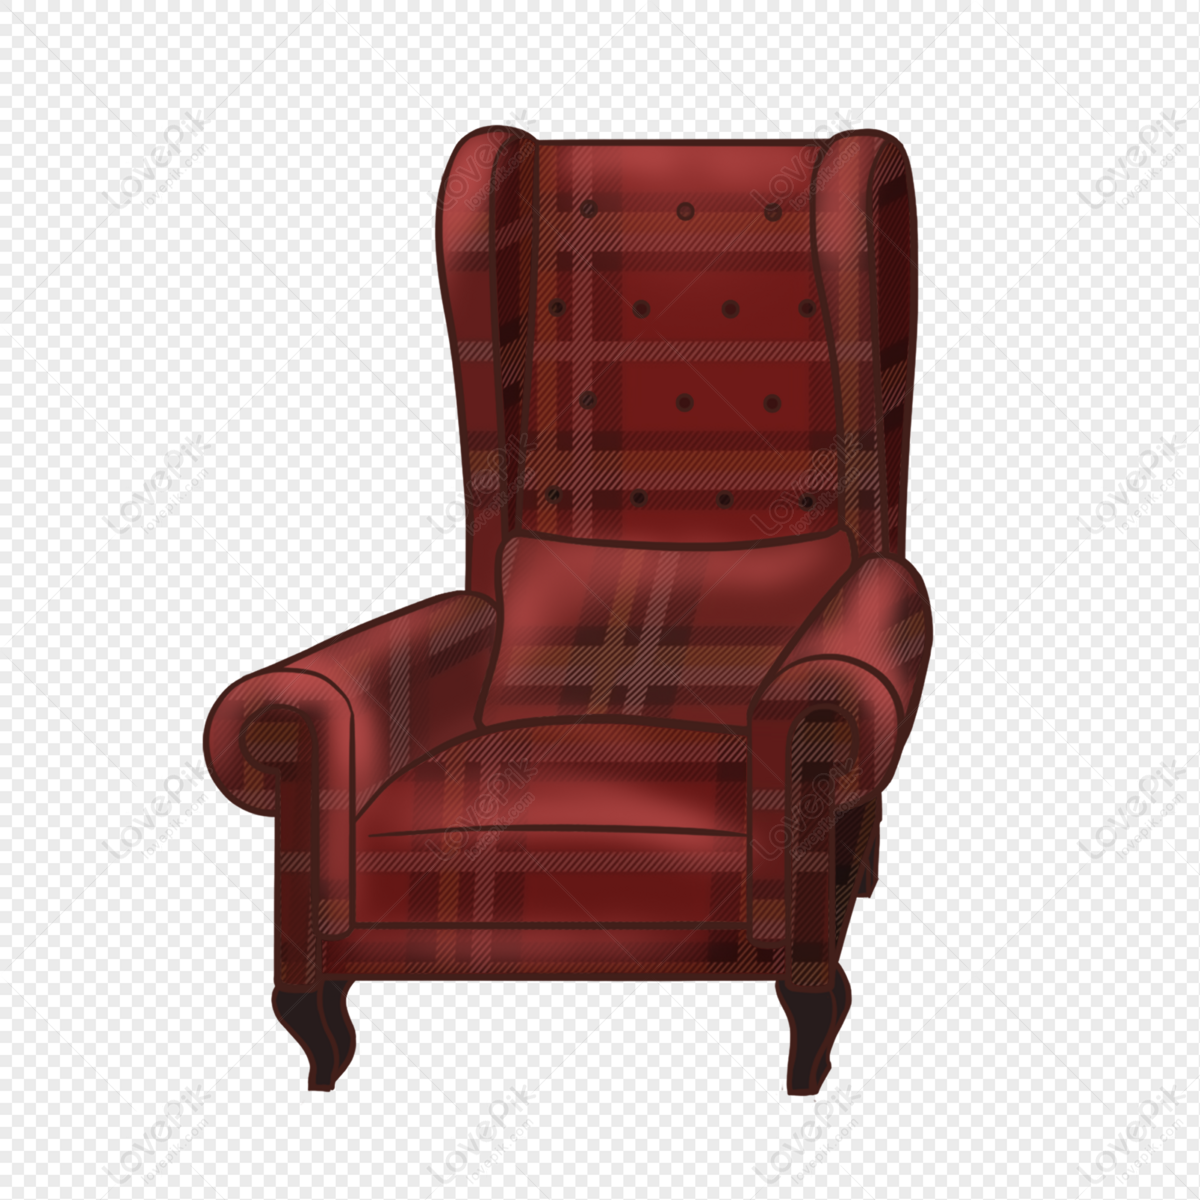 Cartoon Sofa Free PNG And Clipart Image For Free Download - Lovepik |  401572449